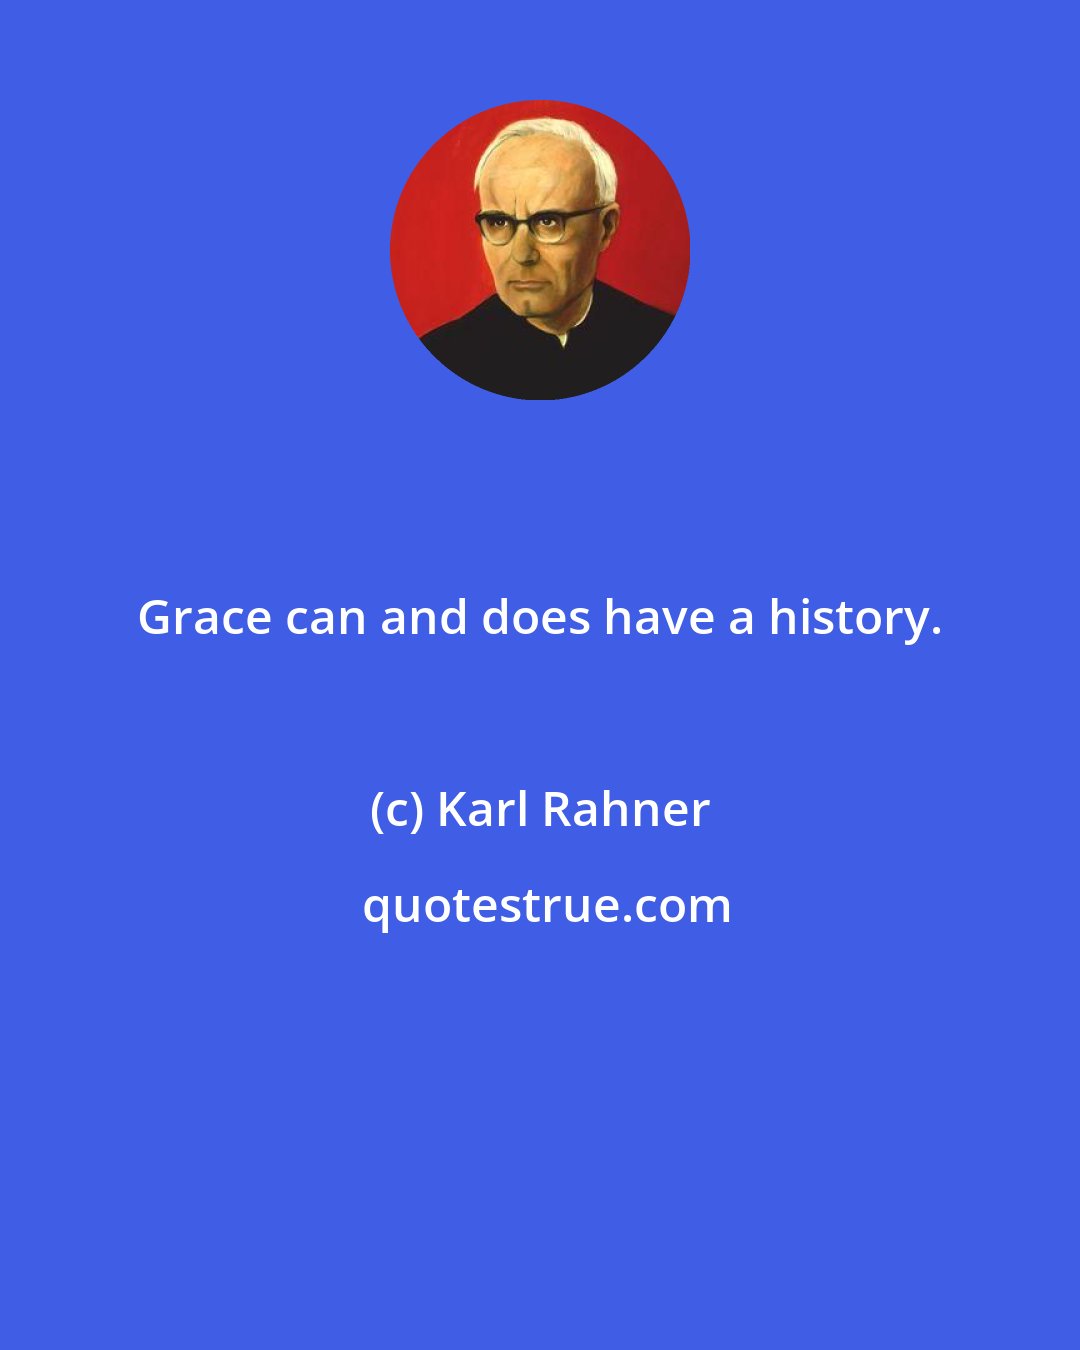 Karl Rahner: Grace can and does have a history.